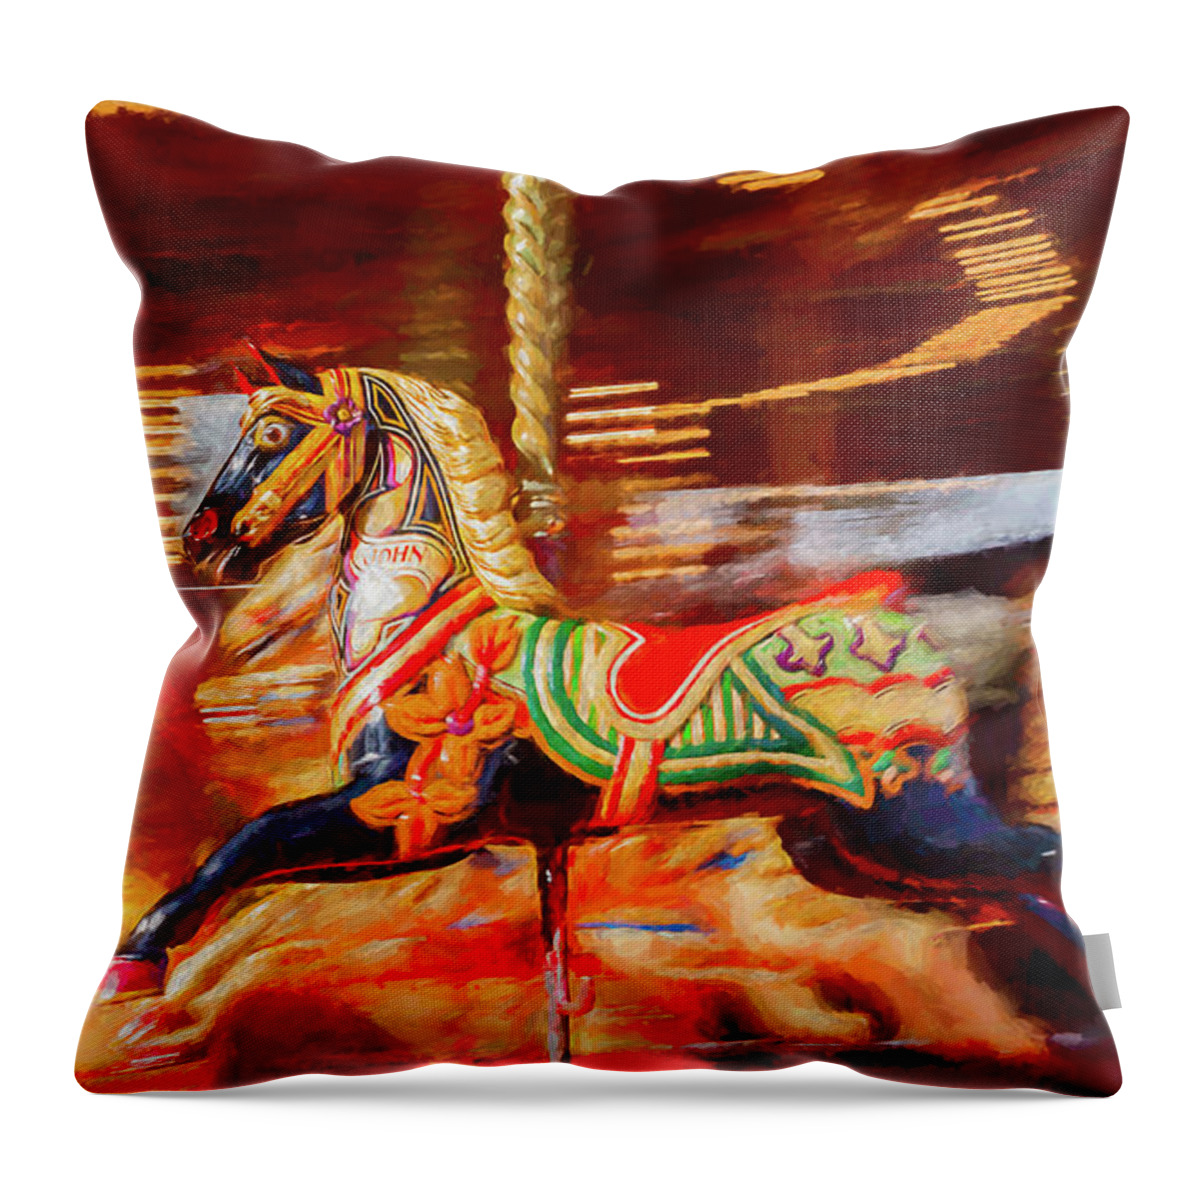 Amusement Throw Pillow featuring the digital art Black Carousel Horse Painting by Rick Deacon